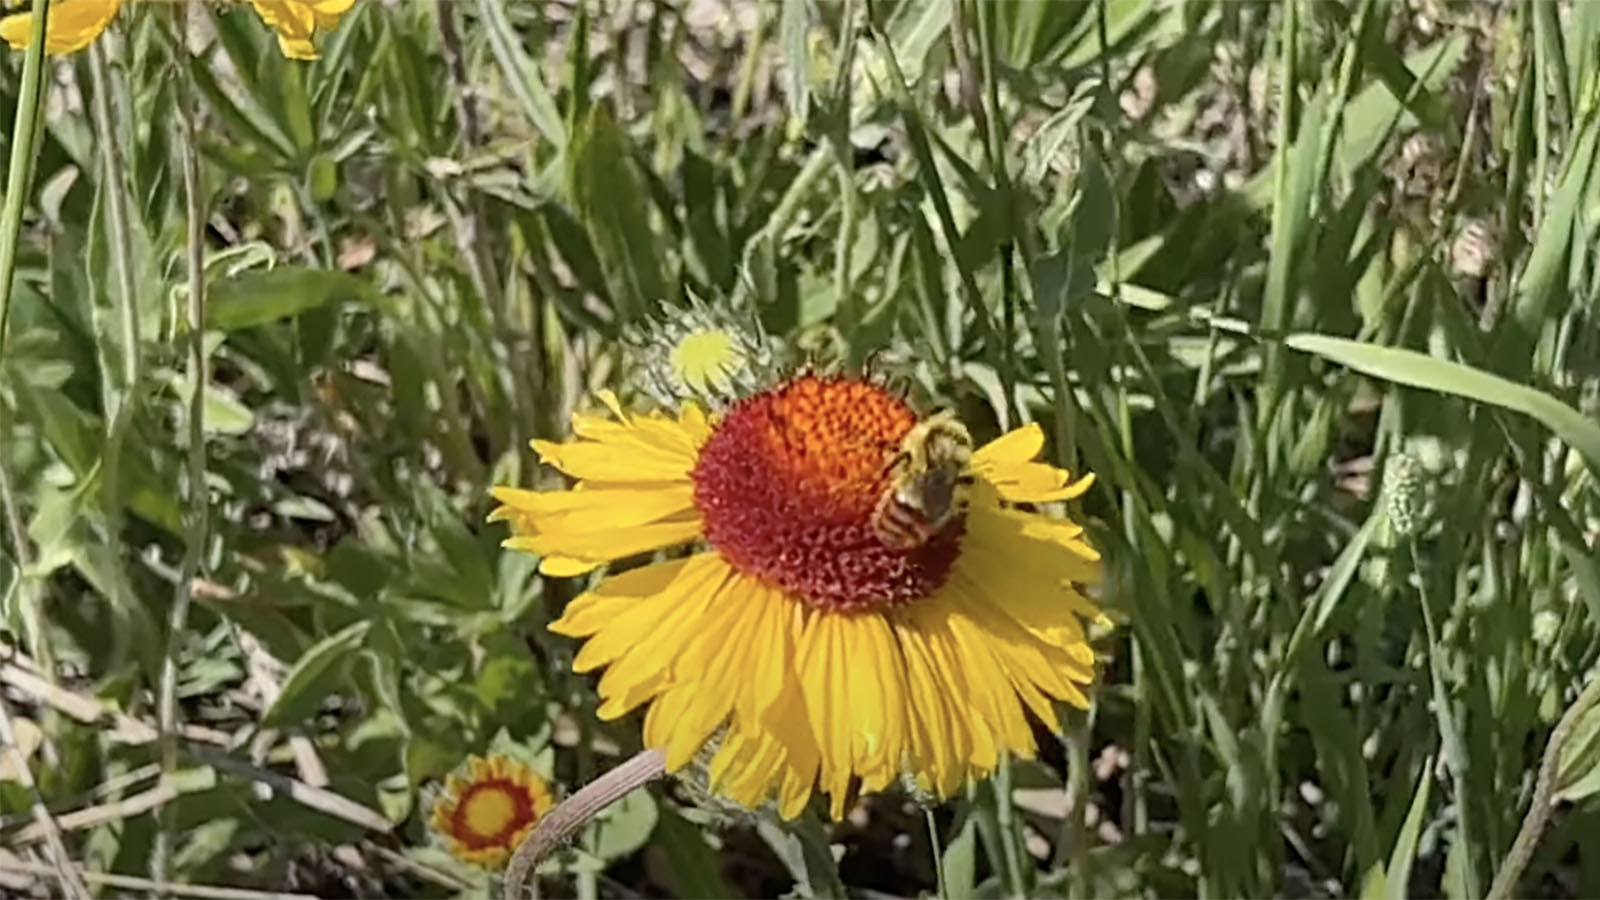 A bee on a wildflower is just one of the many visual treasures to be seen jeeping in Wyoming.